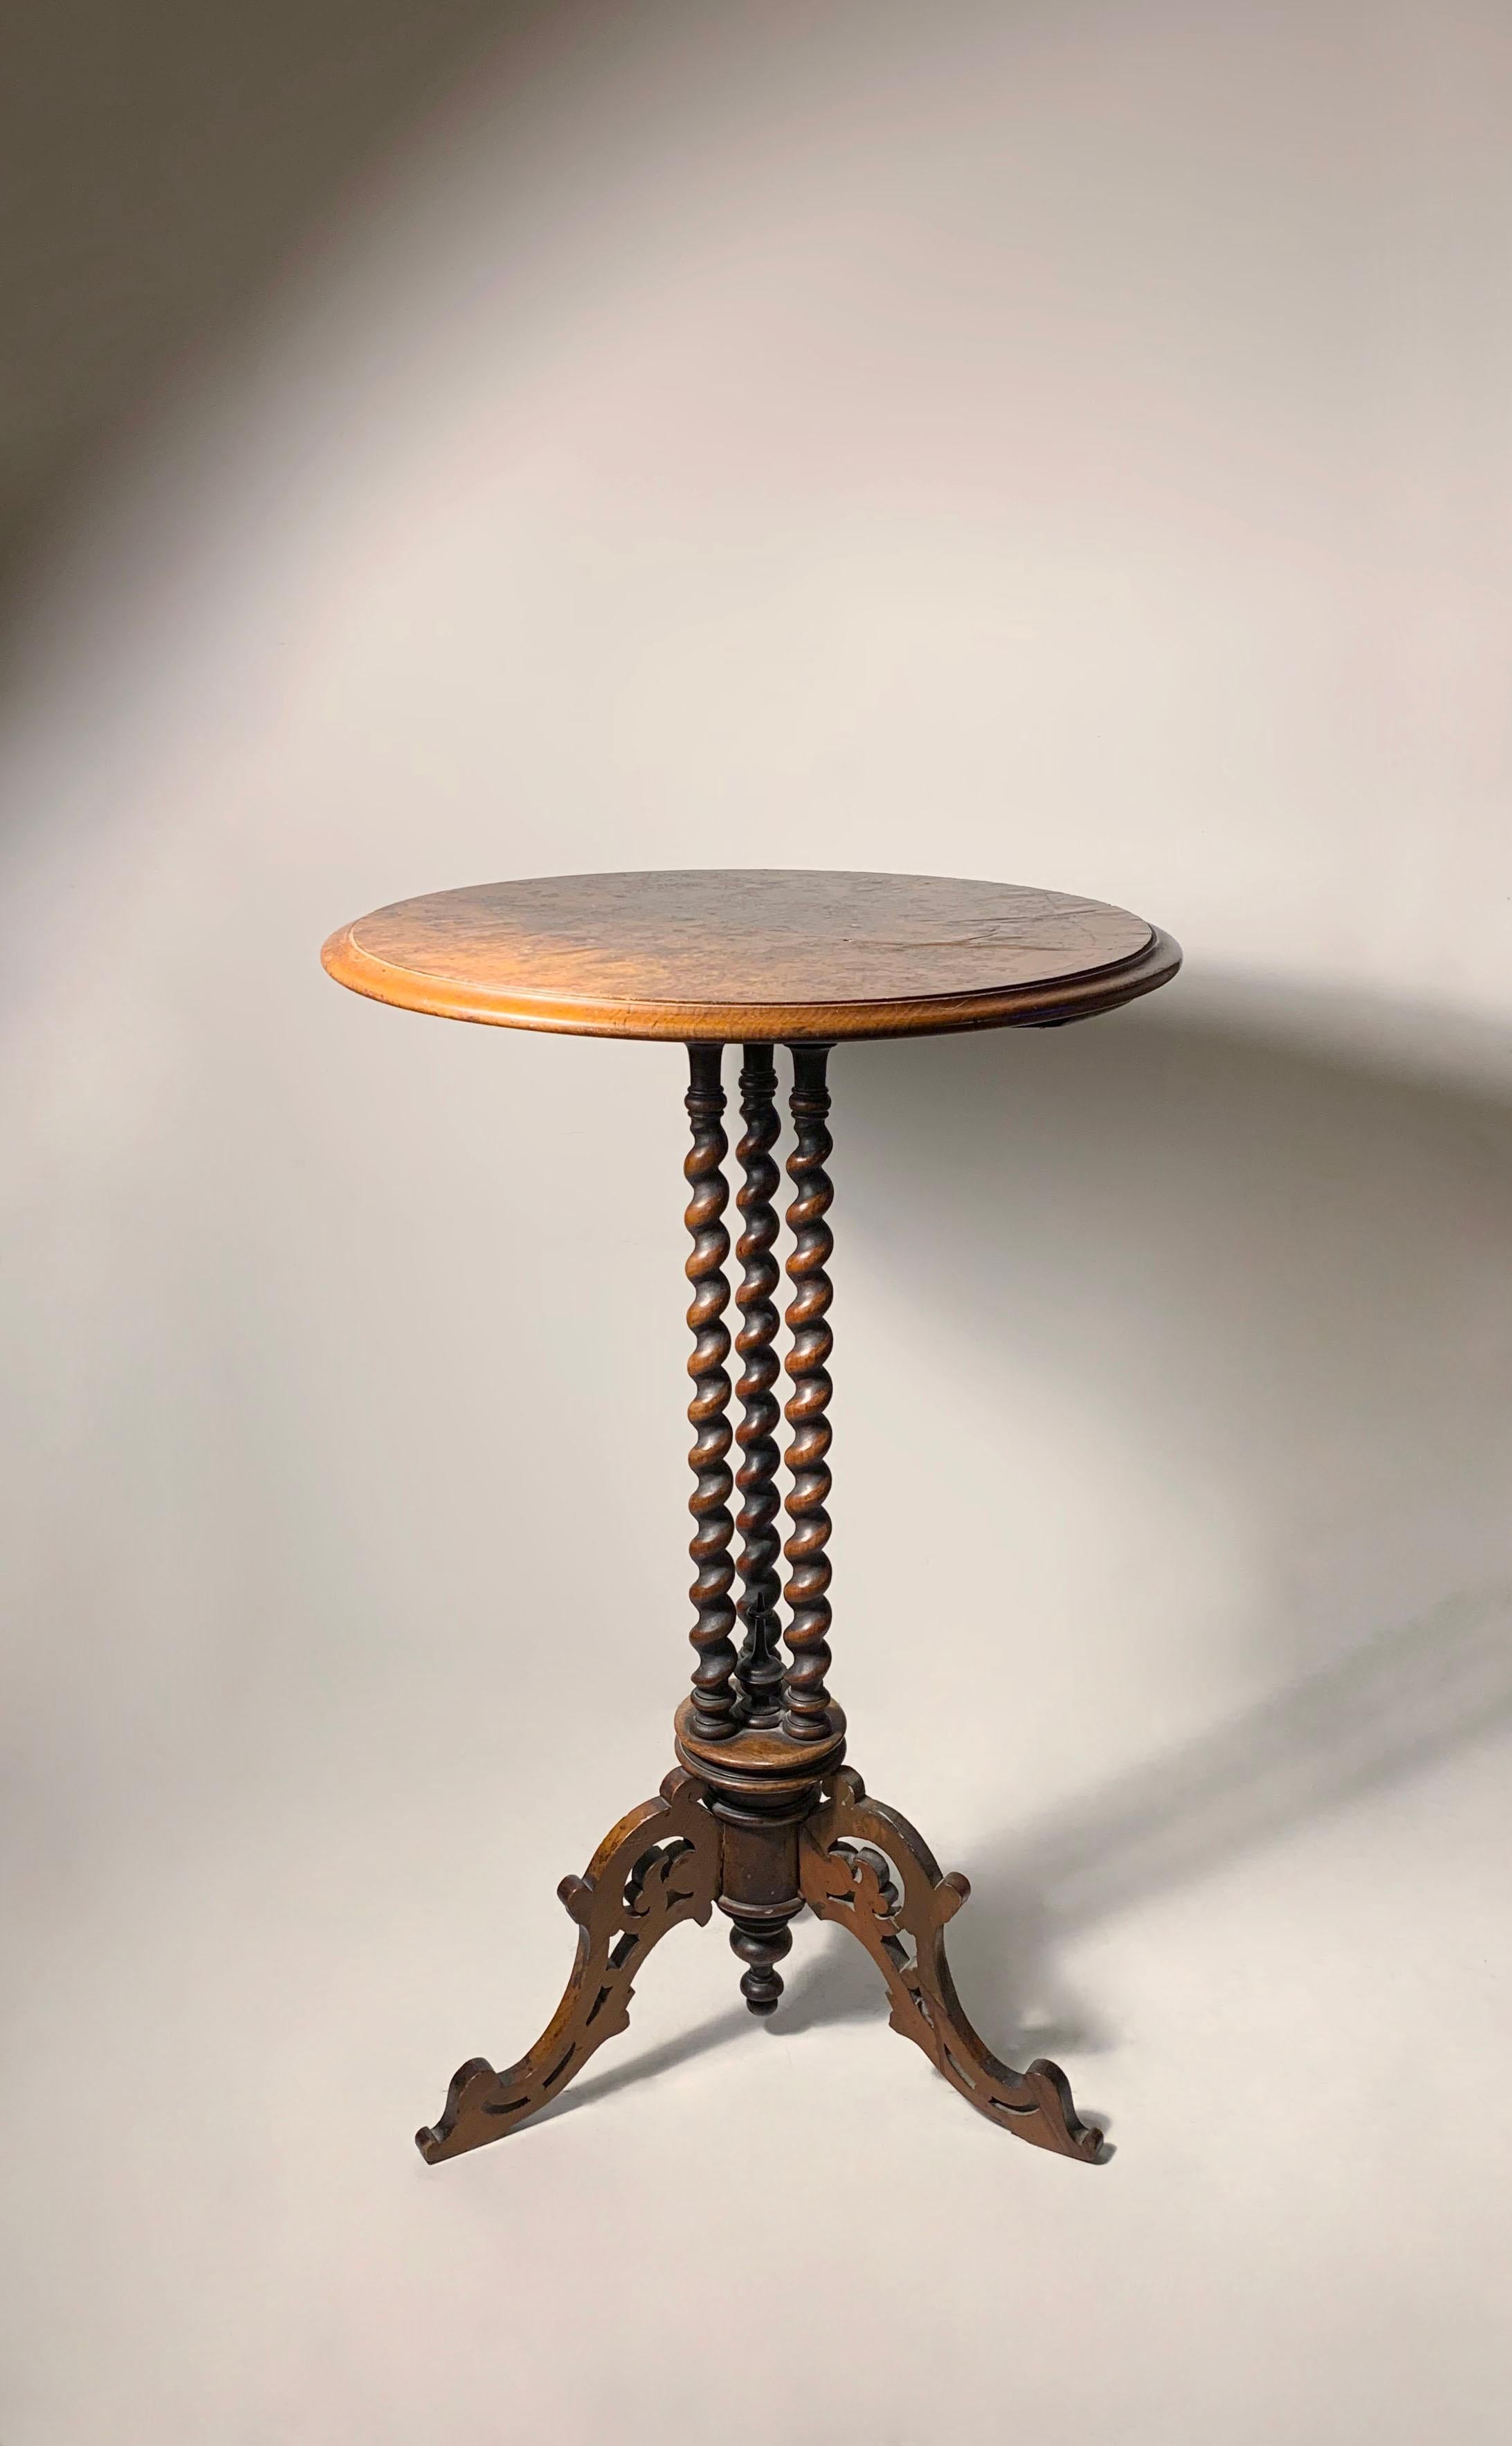 Victorian A Fine Candle Stand Table by Johnstone & Jeanes of London For Sale